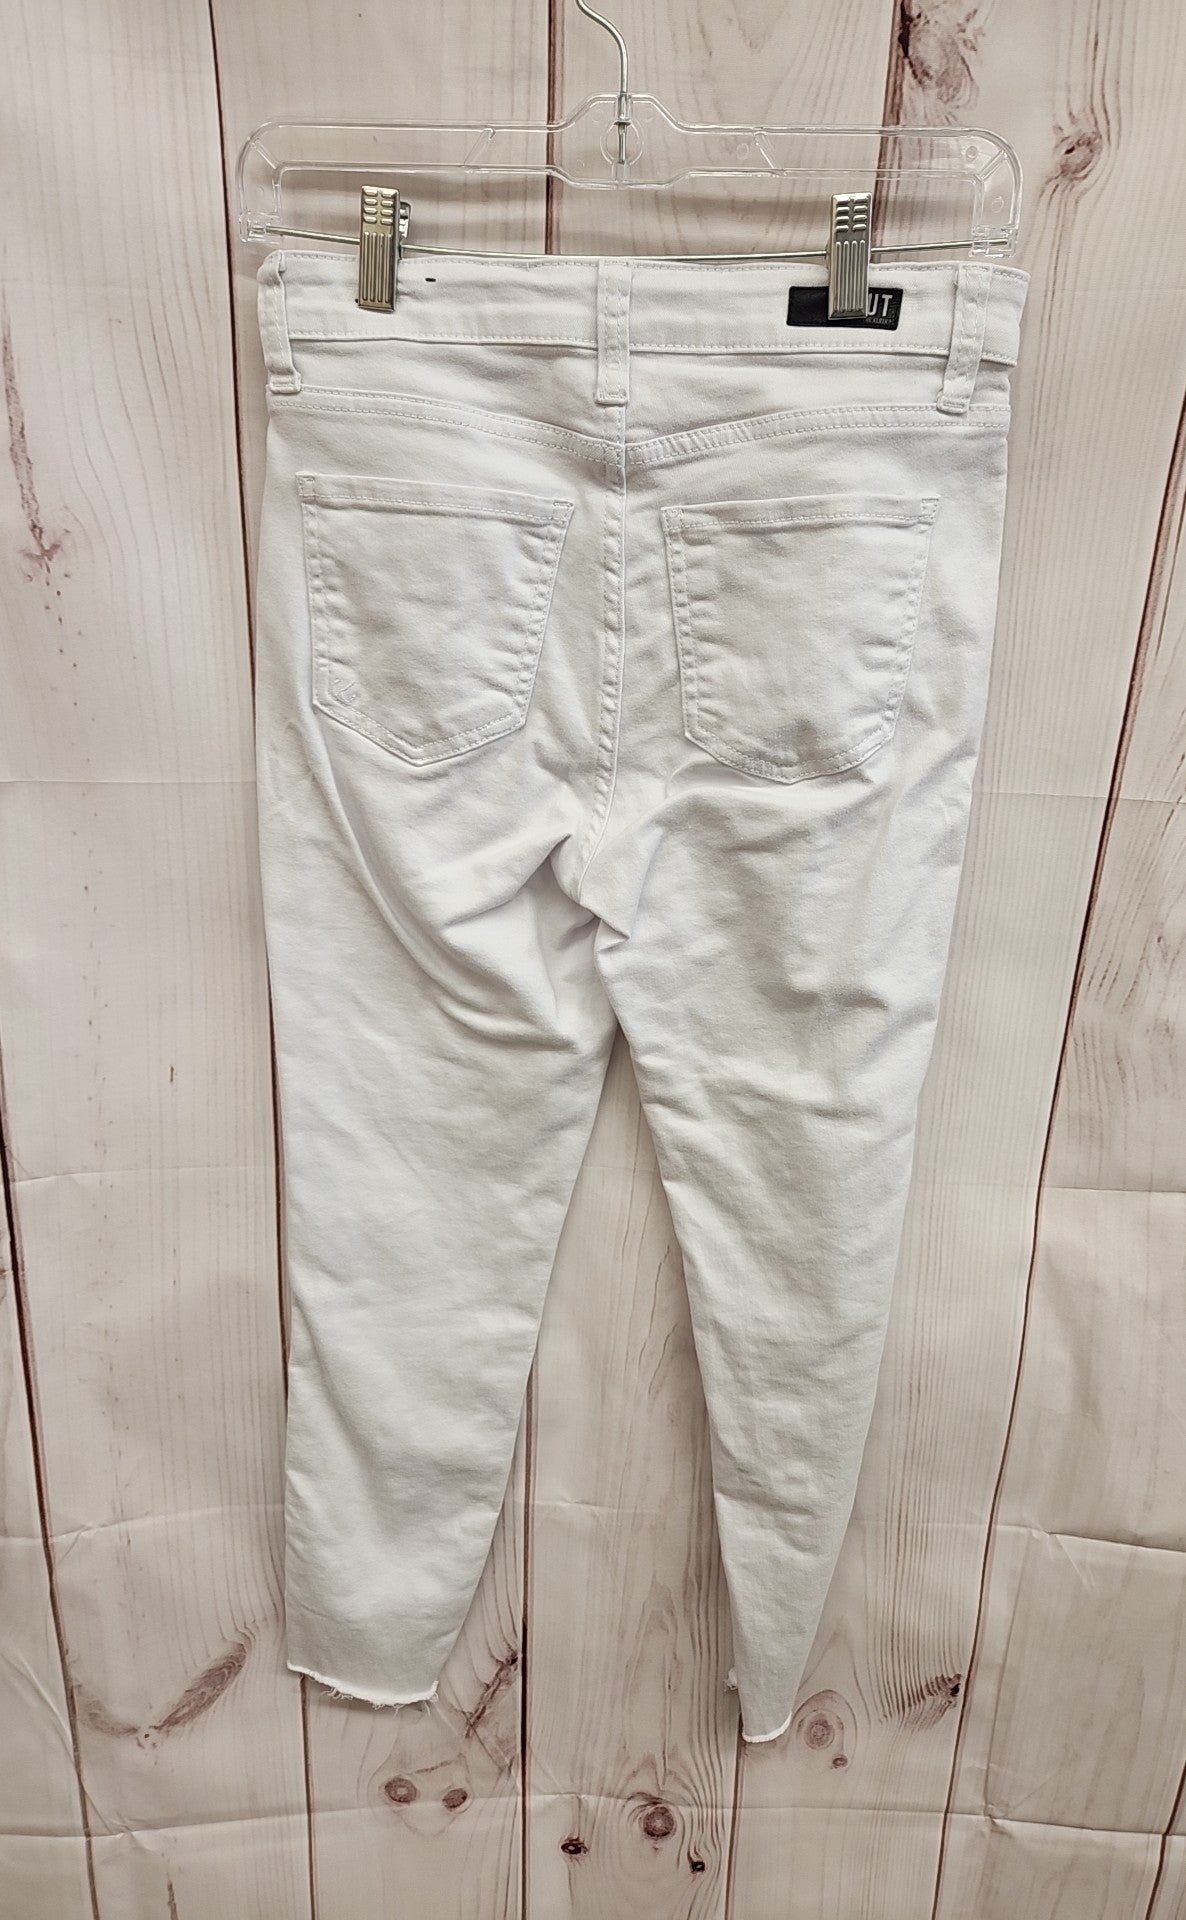 Kut from the Kloth Women's Size 25 (0) Connie High Rise Ankle Skinny White Jeans